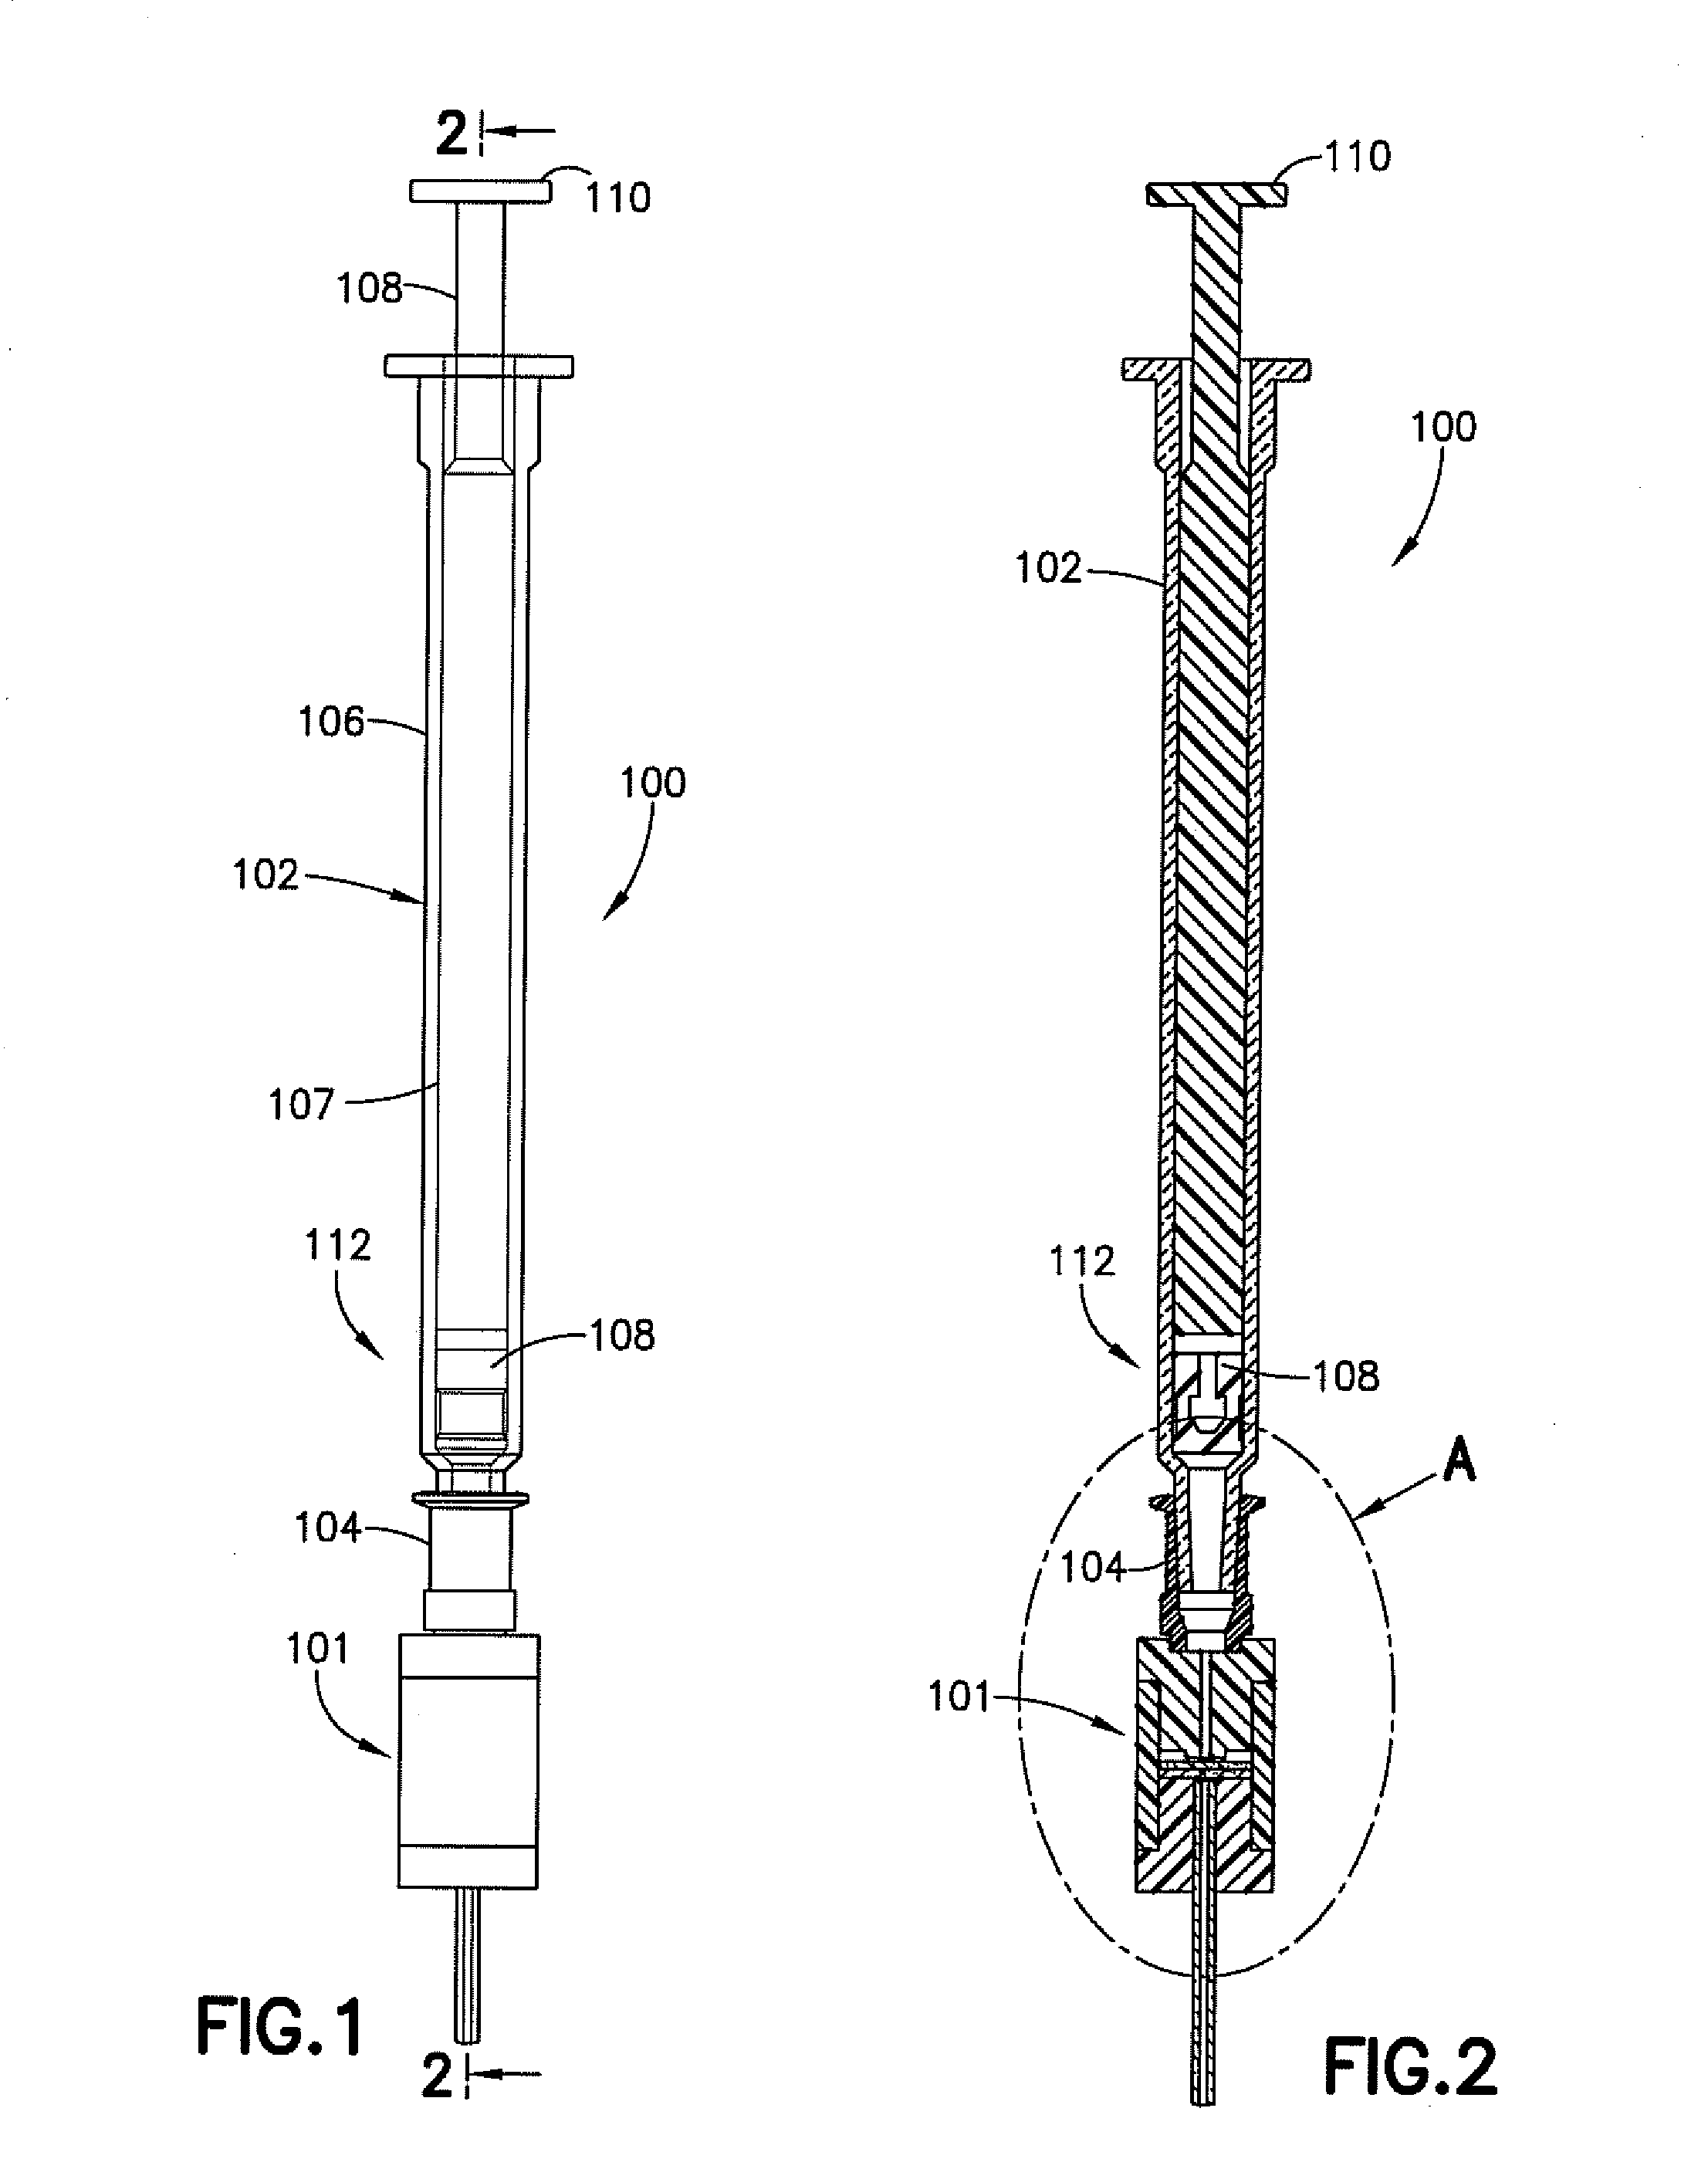 Sample extraction and preparation device